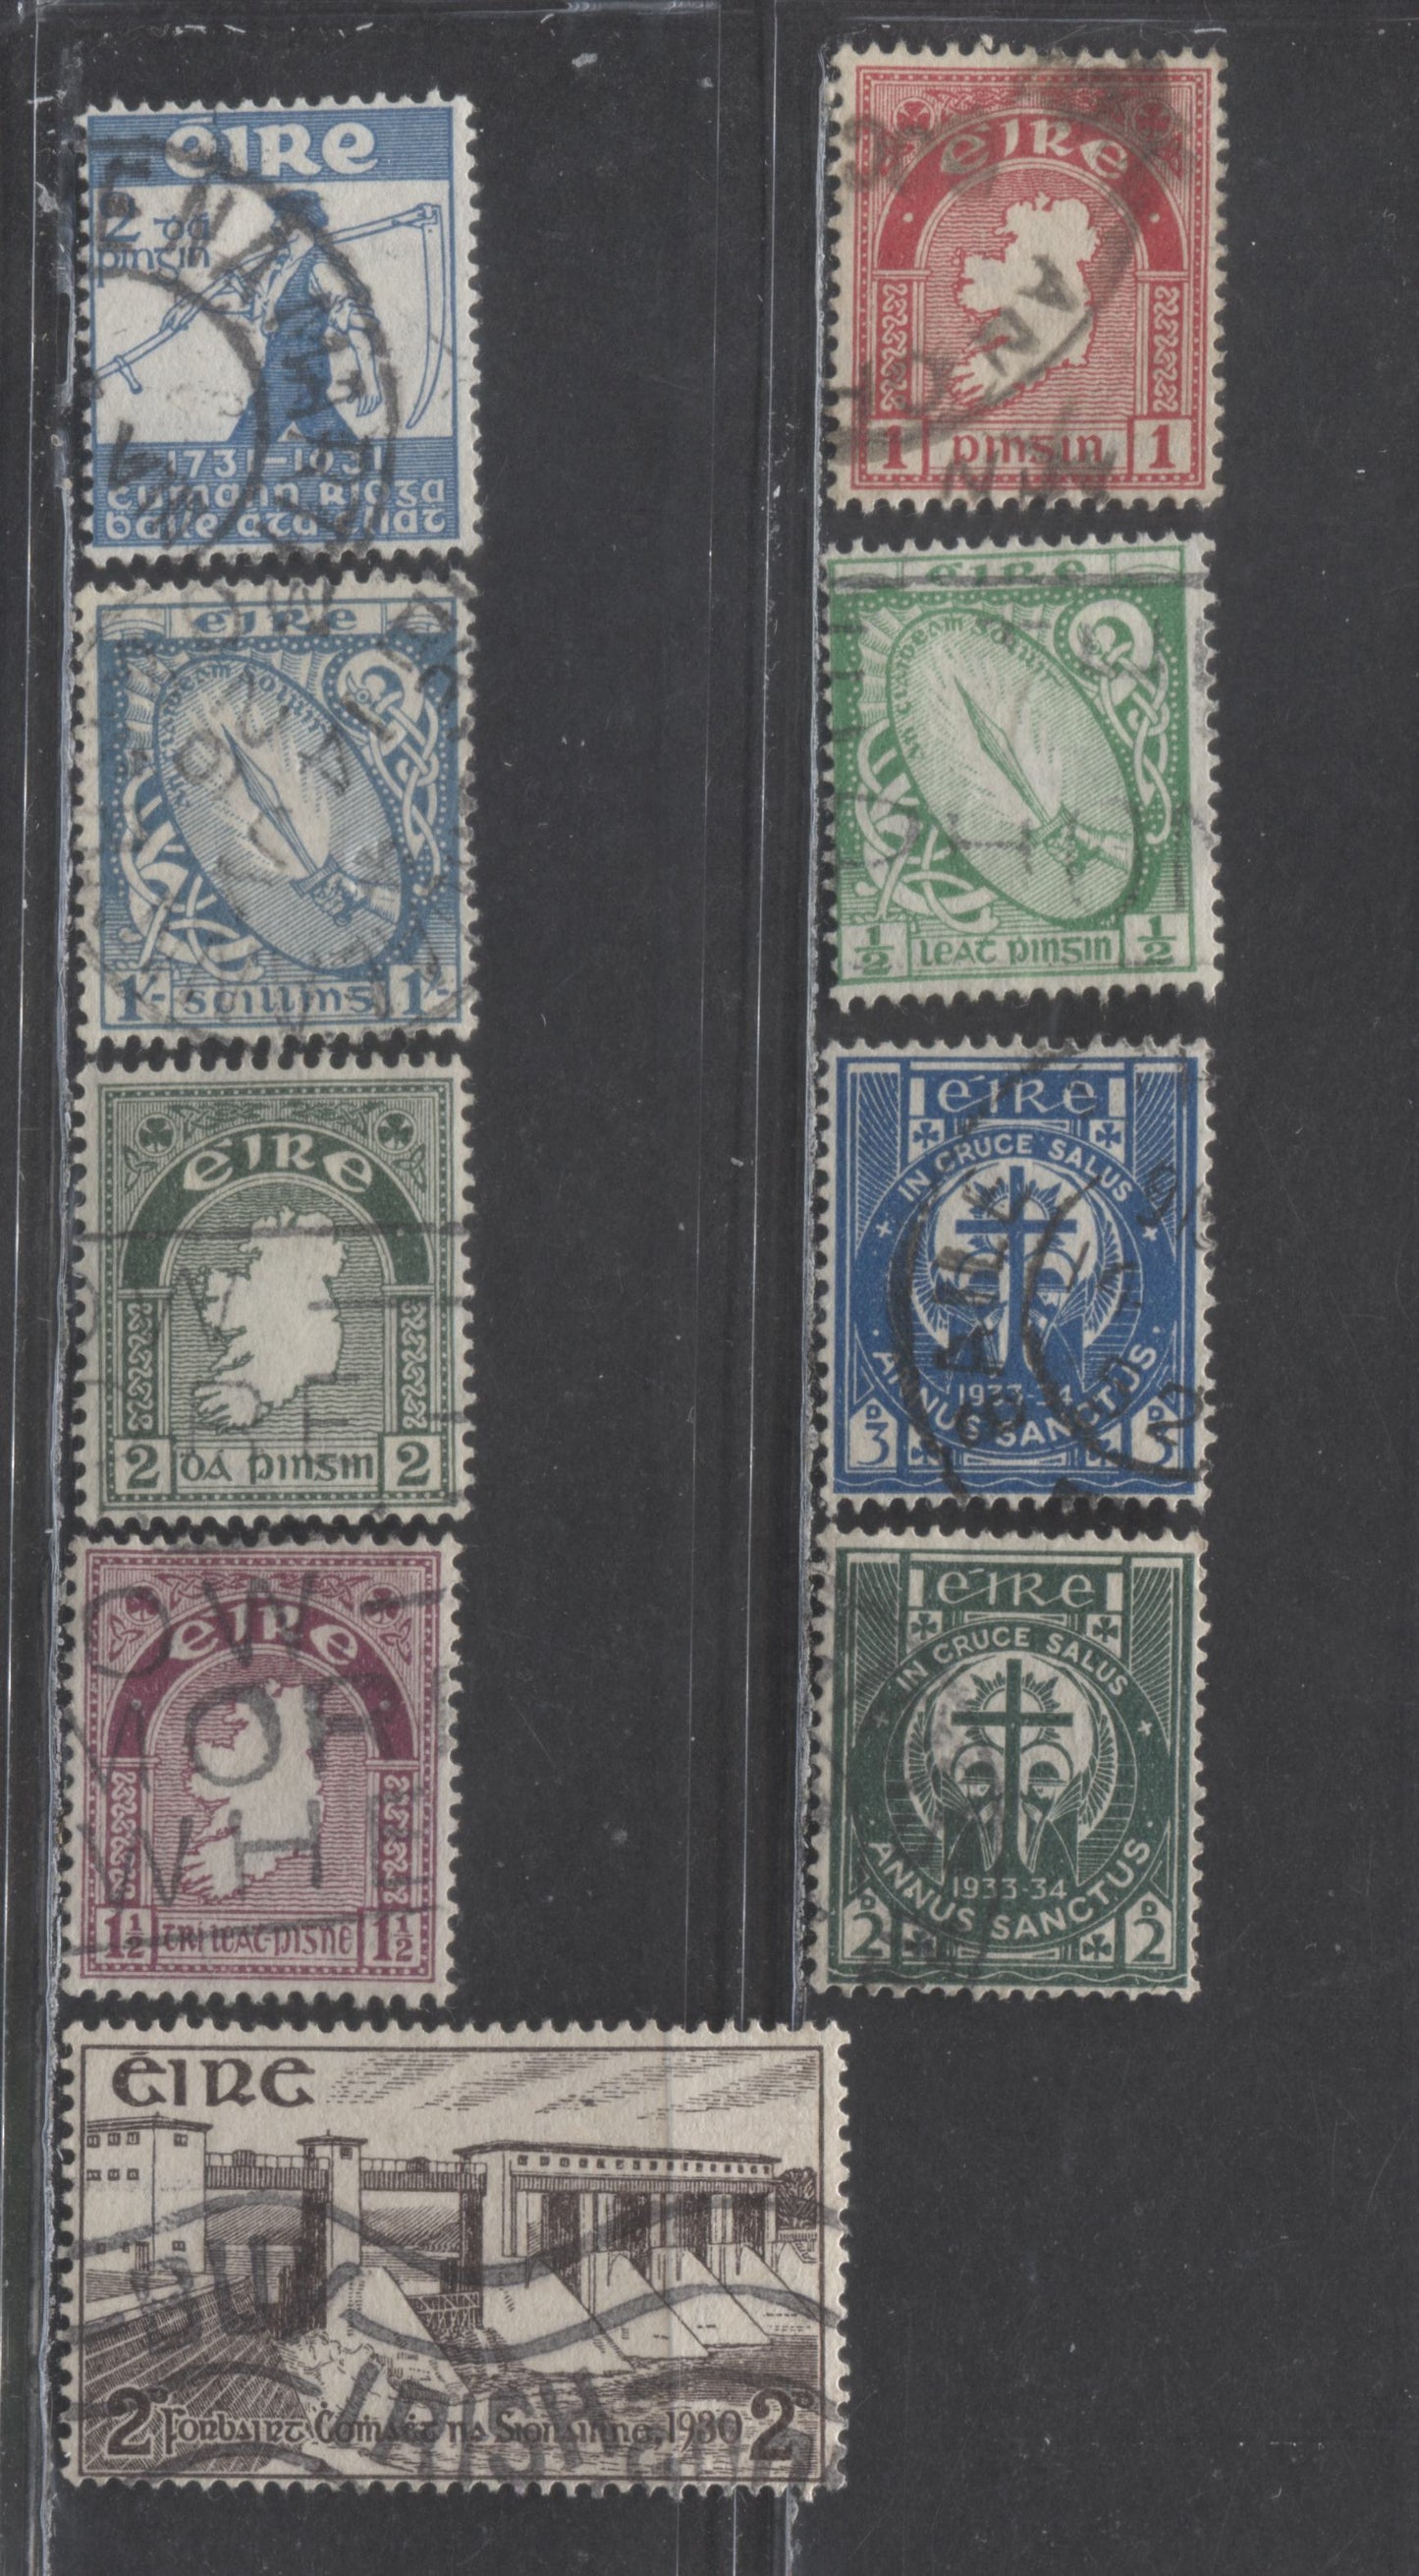 Lot 370 Ireland SC#65/89 1922-1923 Definitives & Commemoratives, 9 Fine/Very Fine Used Singles, Click on Listing to See ALL Pictures, 2022 Scott Classic Cat. $35.55 USD